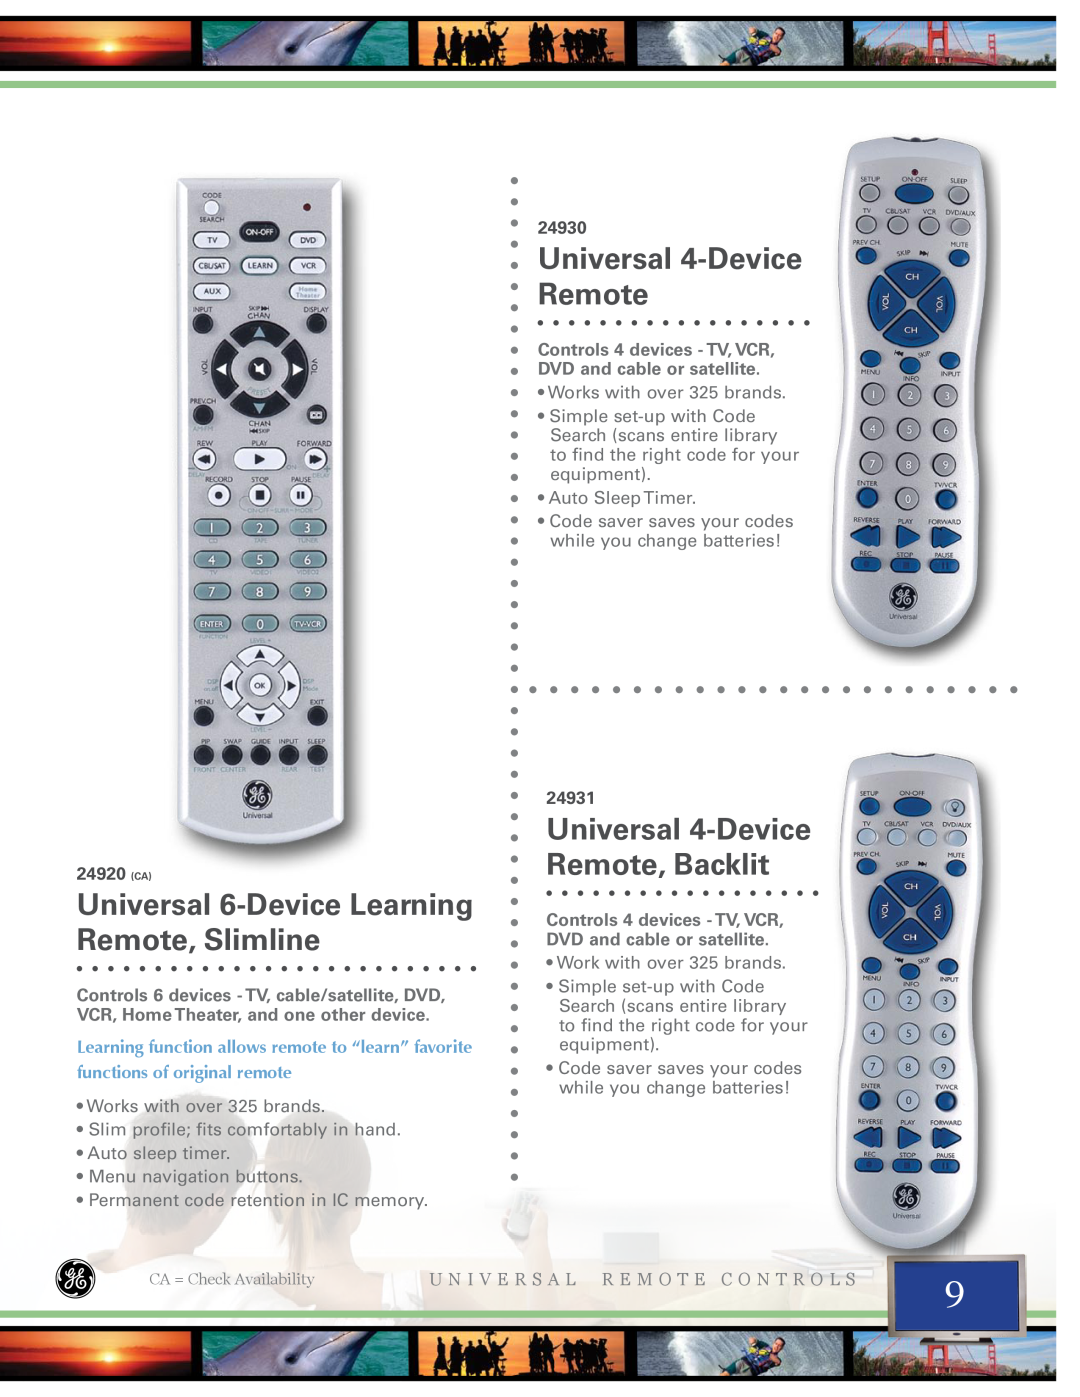 Jasco 24978 Universal 6-Device Learning Remote, Slimline, Universal 4-Device Remote, Backlit, 24920 CA, 24930, 24931 